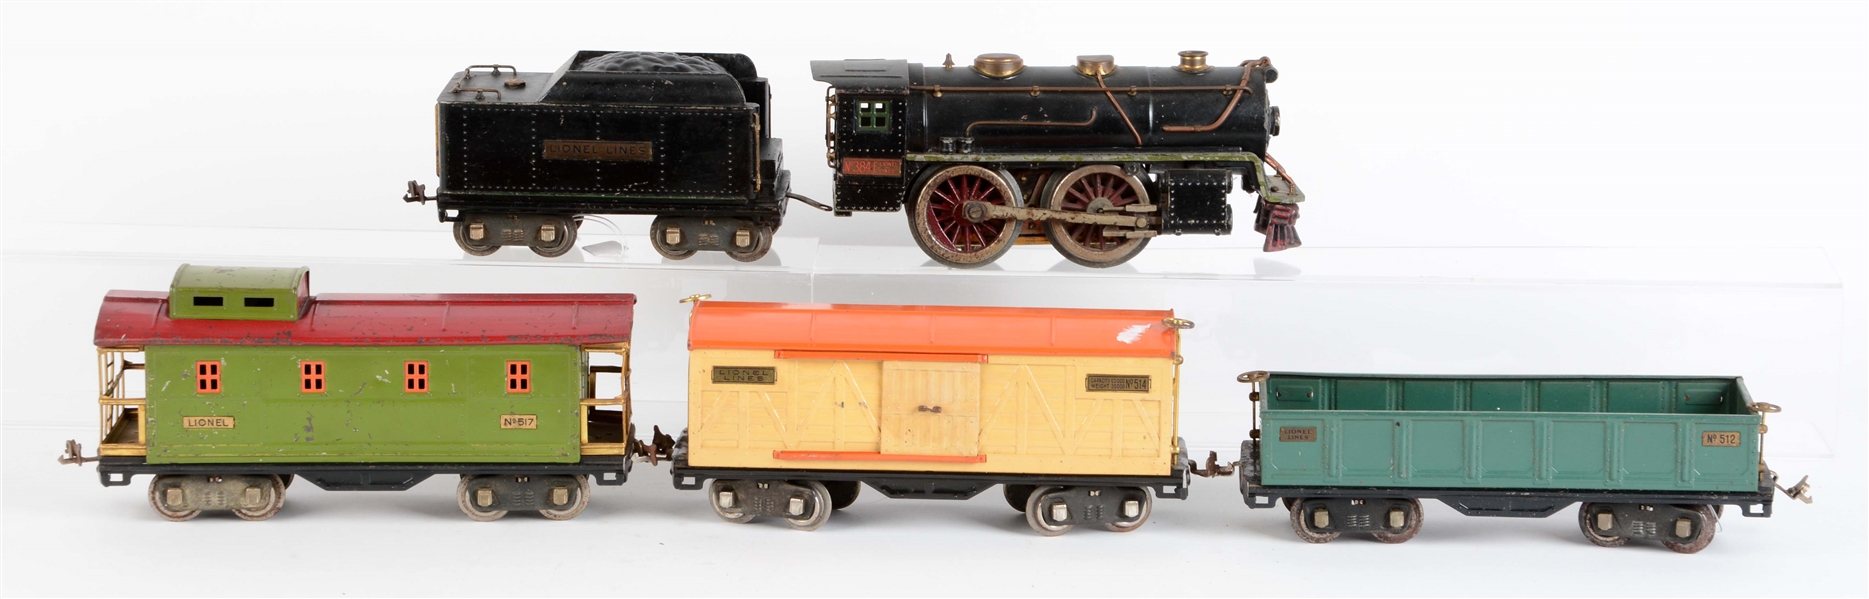 LOT OF 5: LIONEL NO. 384 LOCOMOTIVE & FREIGHT CARS. 